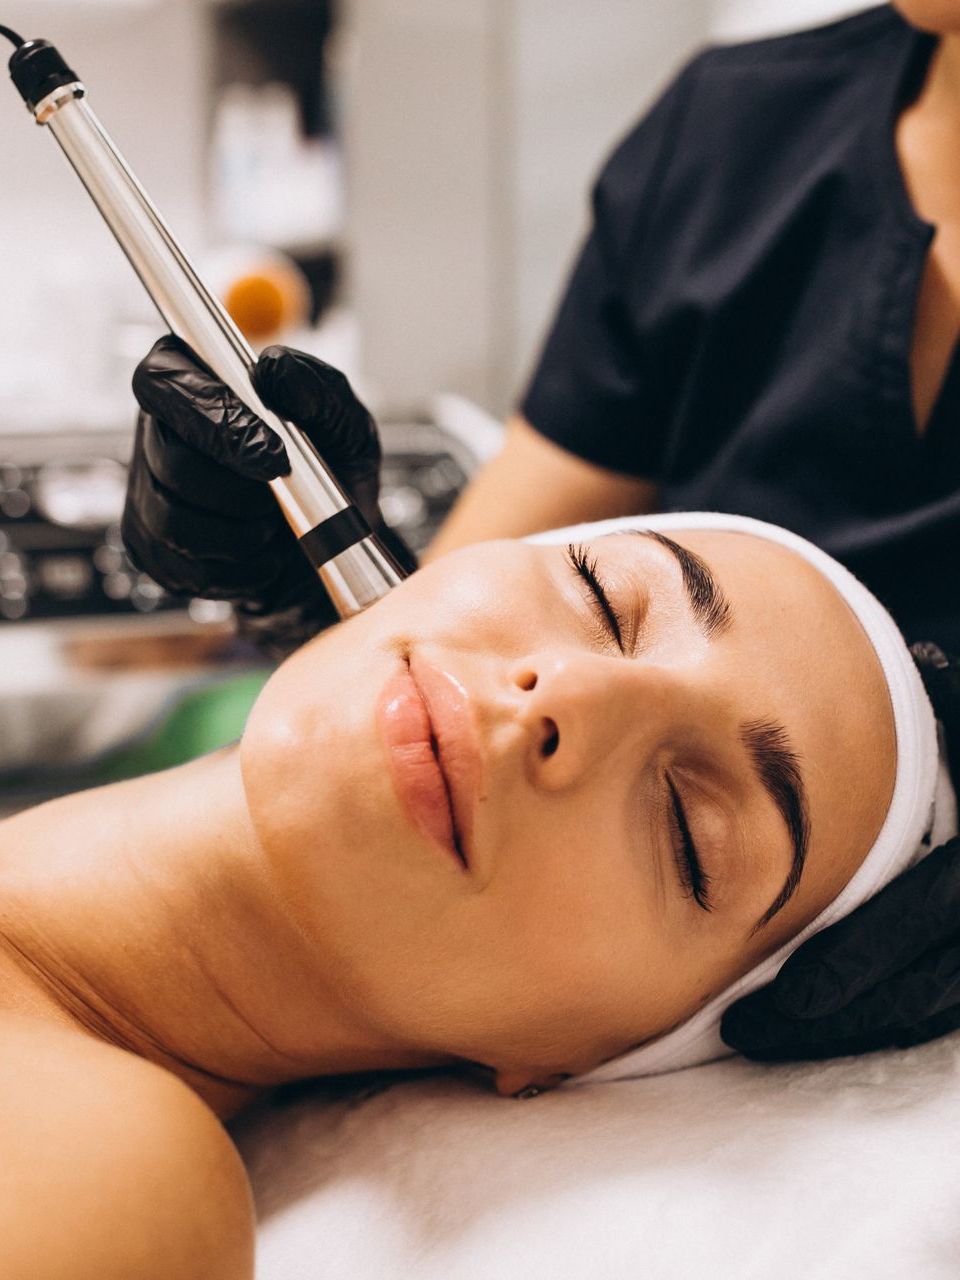 a woman is getting a facial treatment with her eyes closed